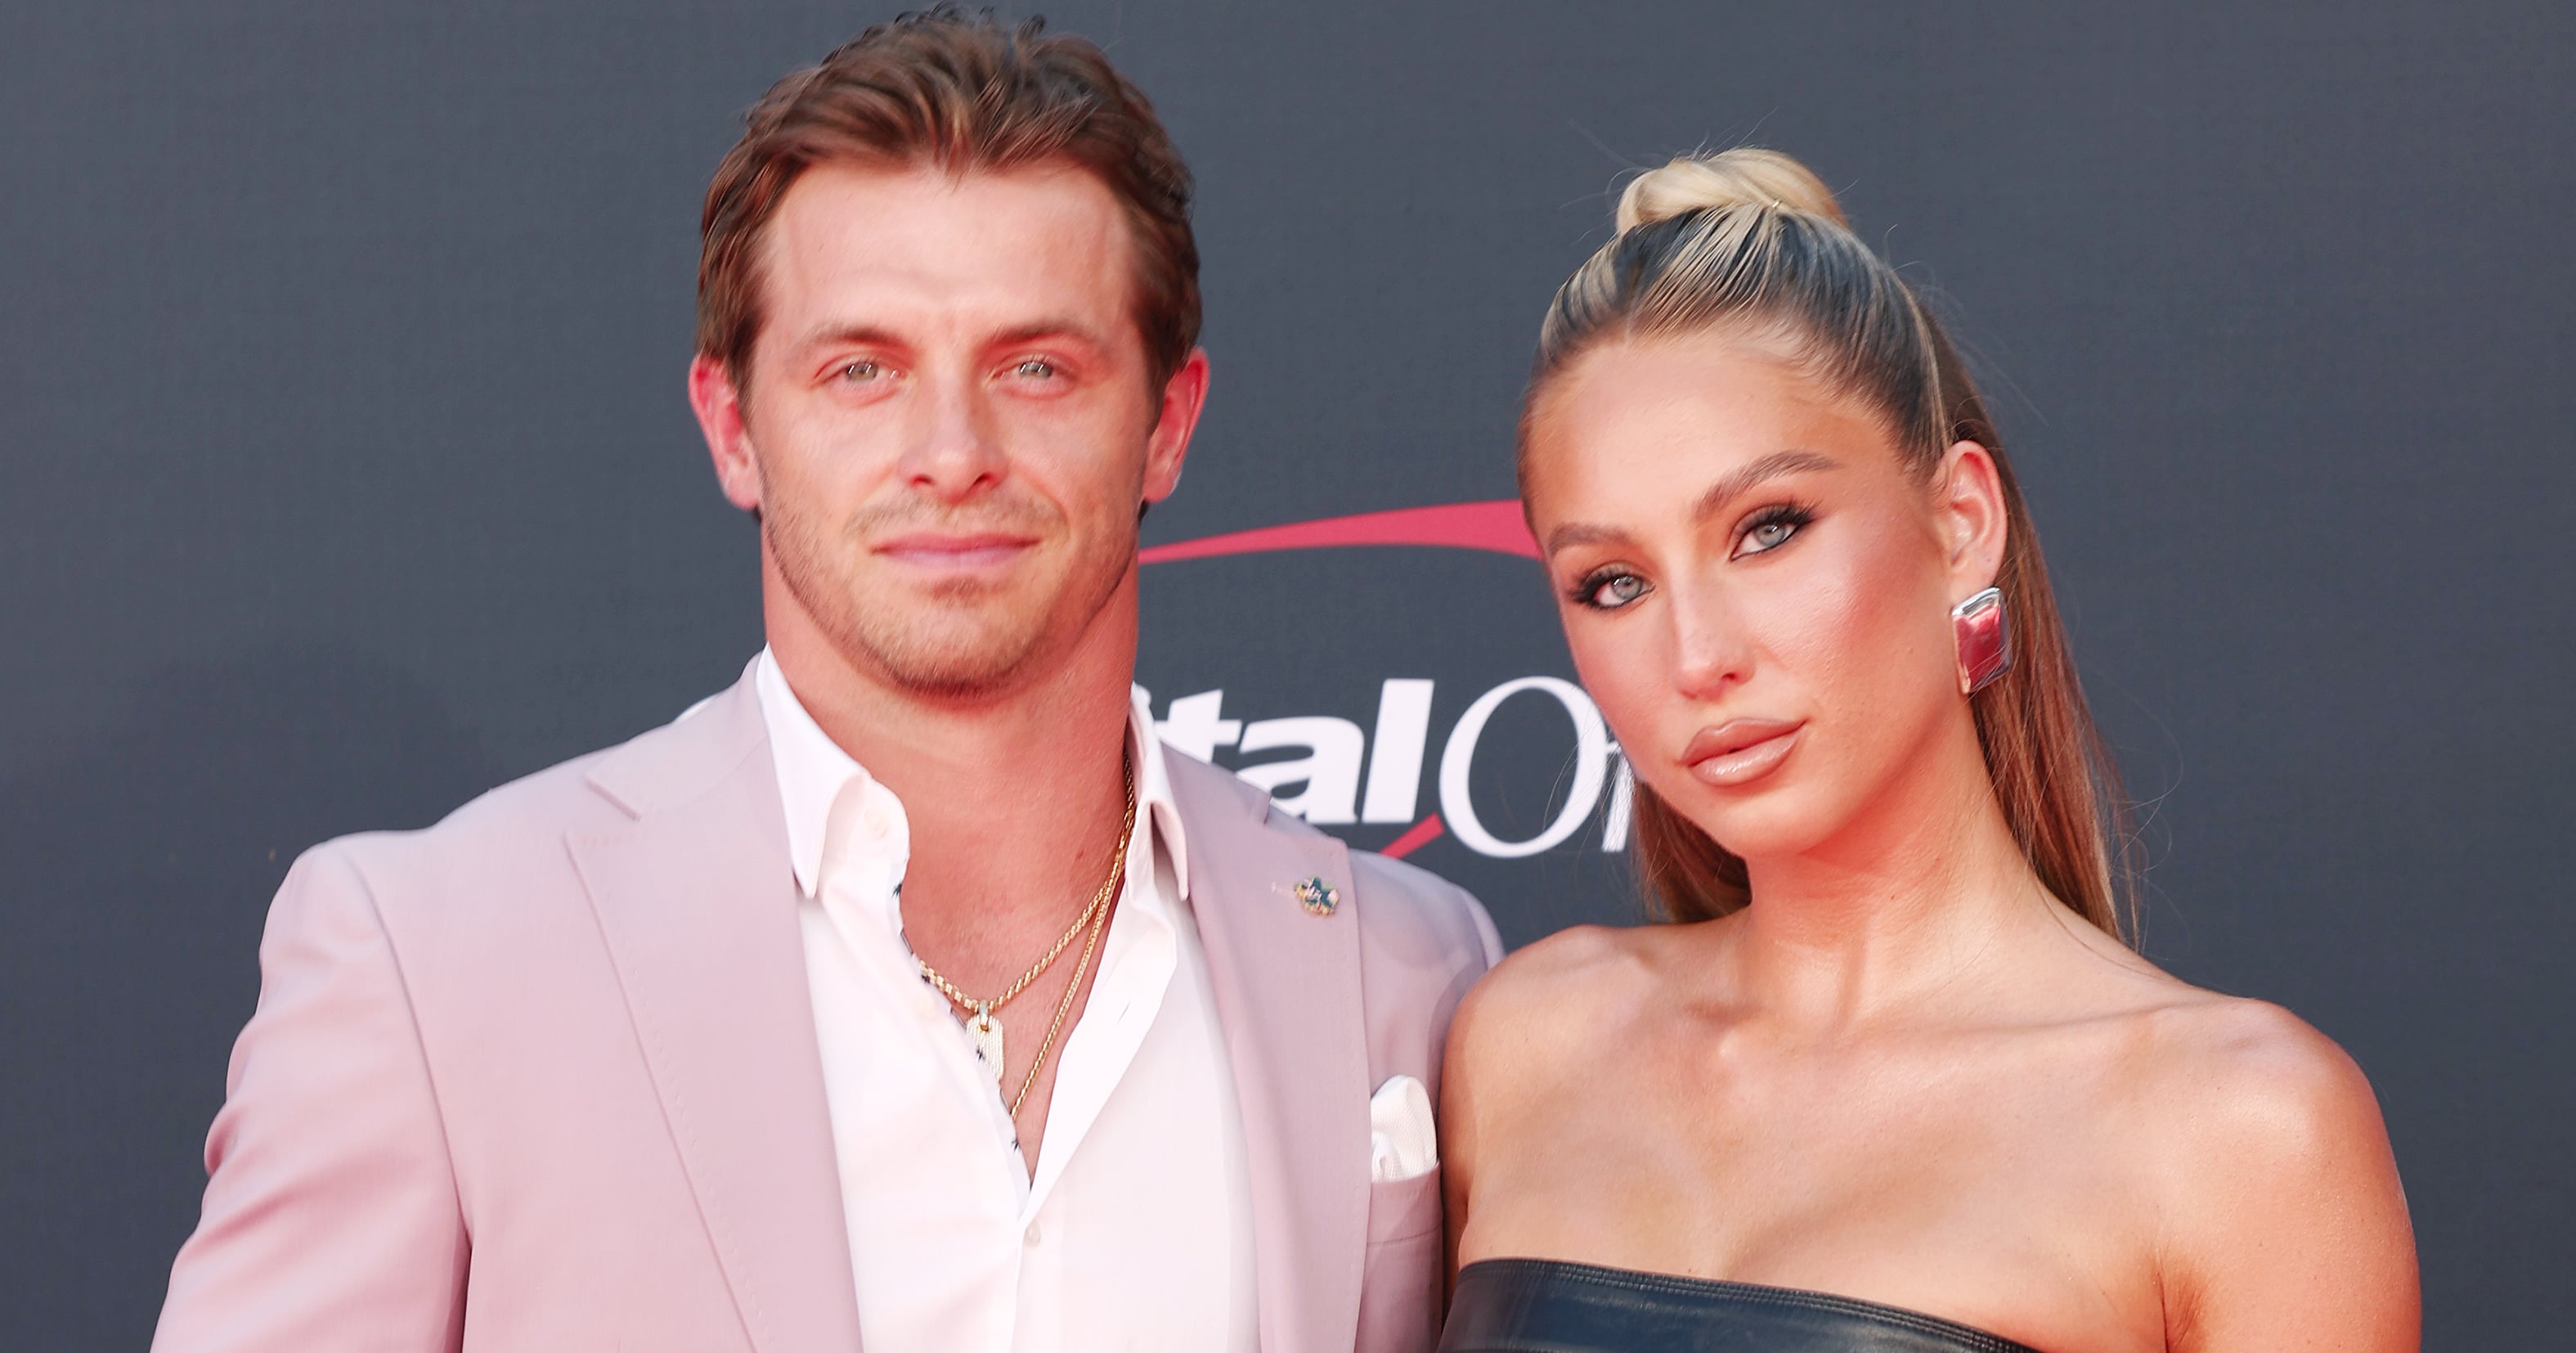 Alix Earle and Braxton Berrios Seemingly Confirm Romance With Red Carpet Debut at ESPYs